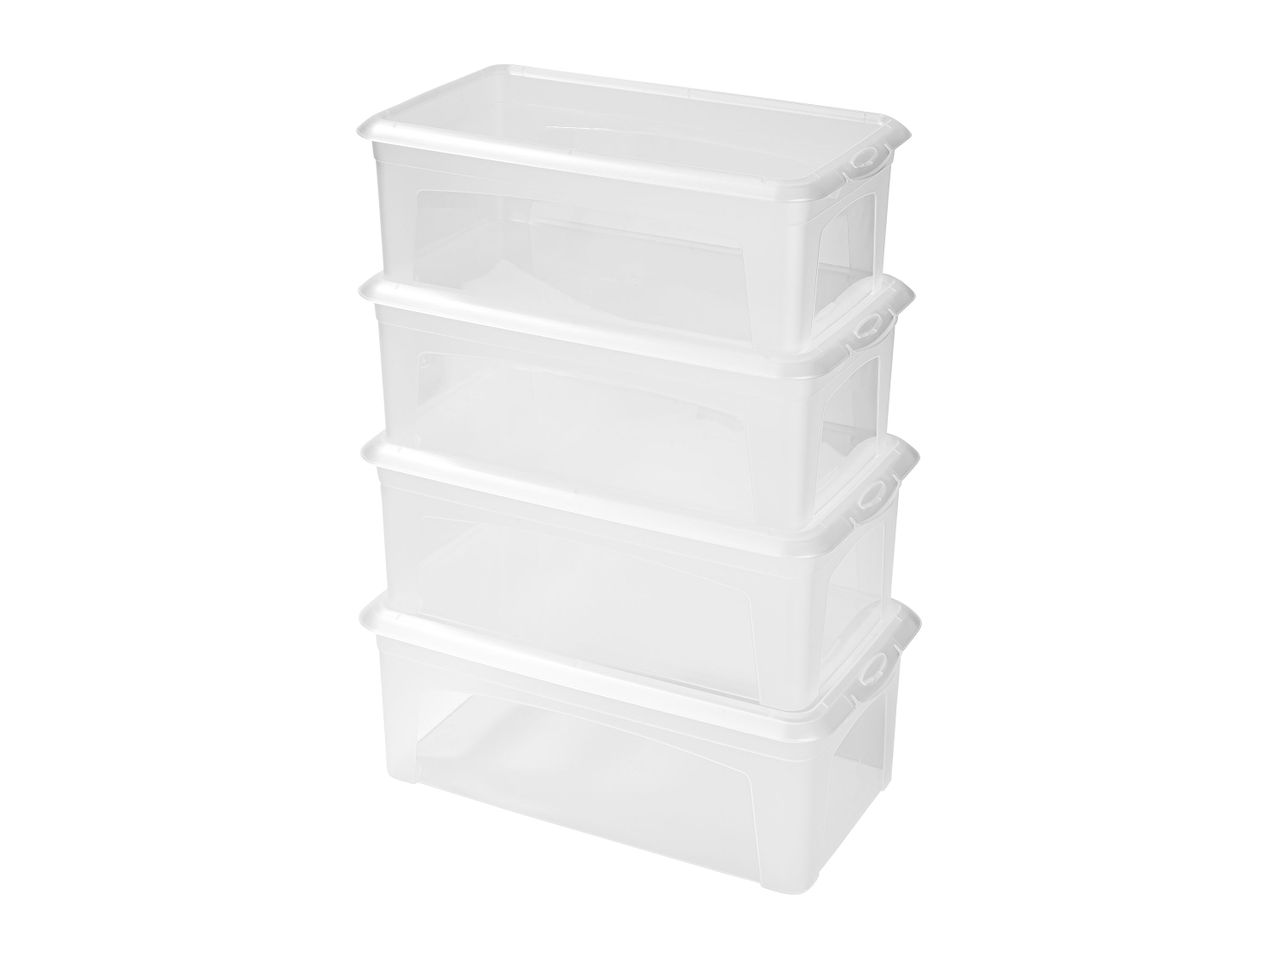 Go to full screen view: Livarno Home Storage Boxes - Image 1